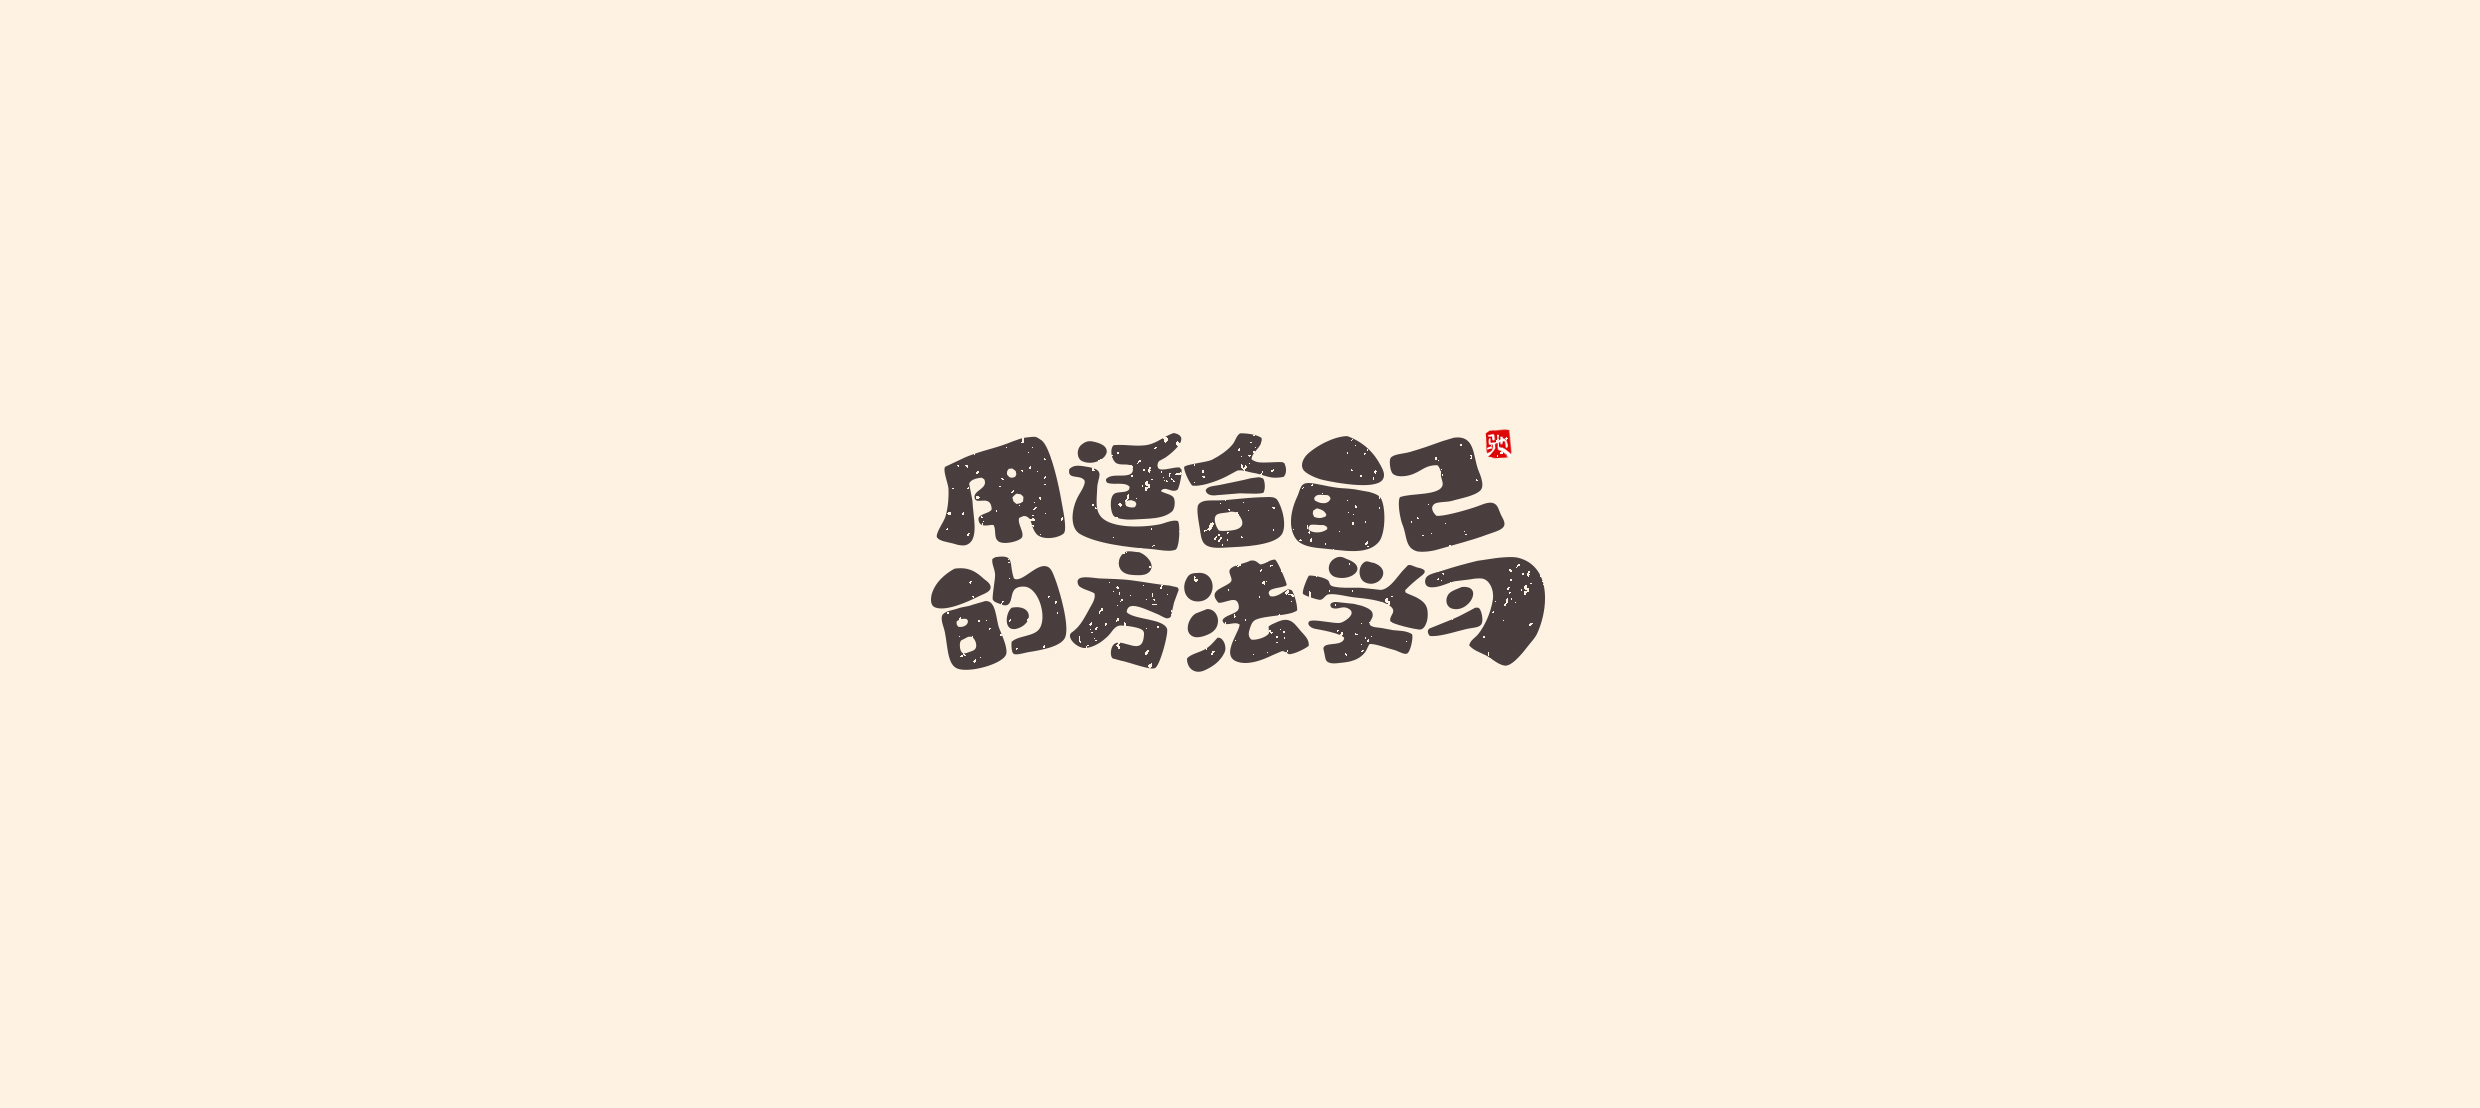 24P Collection of the latest Chinese font design schemes in 2021 #.86